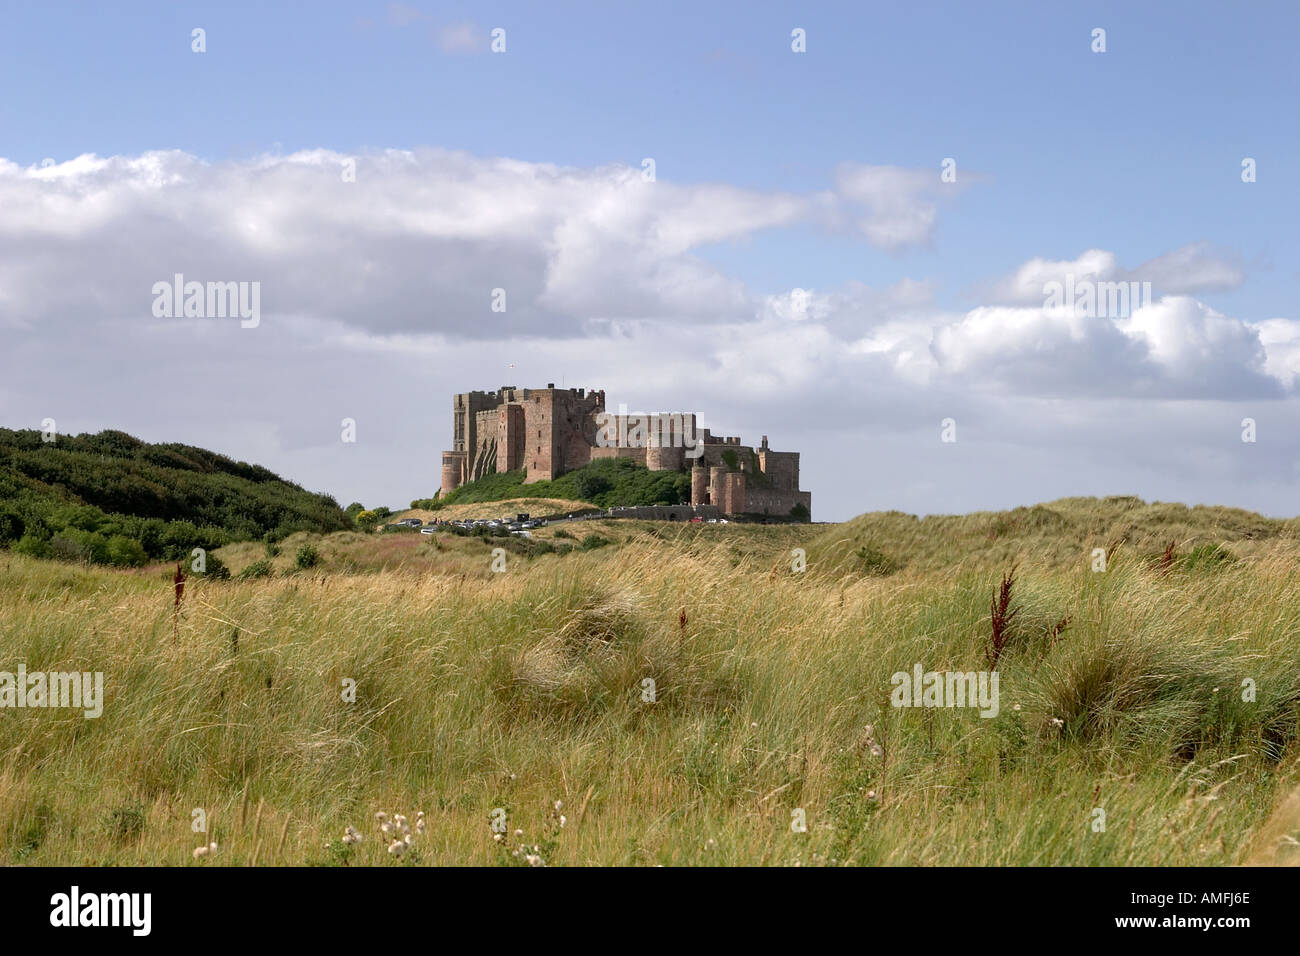 Landscape shot showing grassy foreground bamburgh castle in middle distance and blue sky with large white clouds Stock Photo